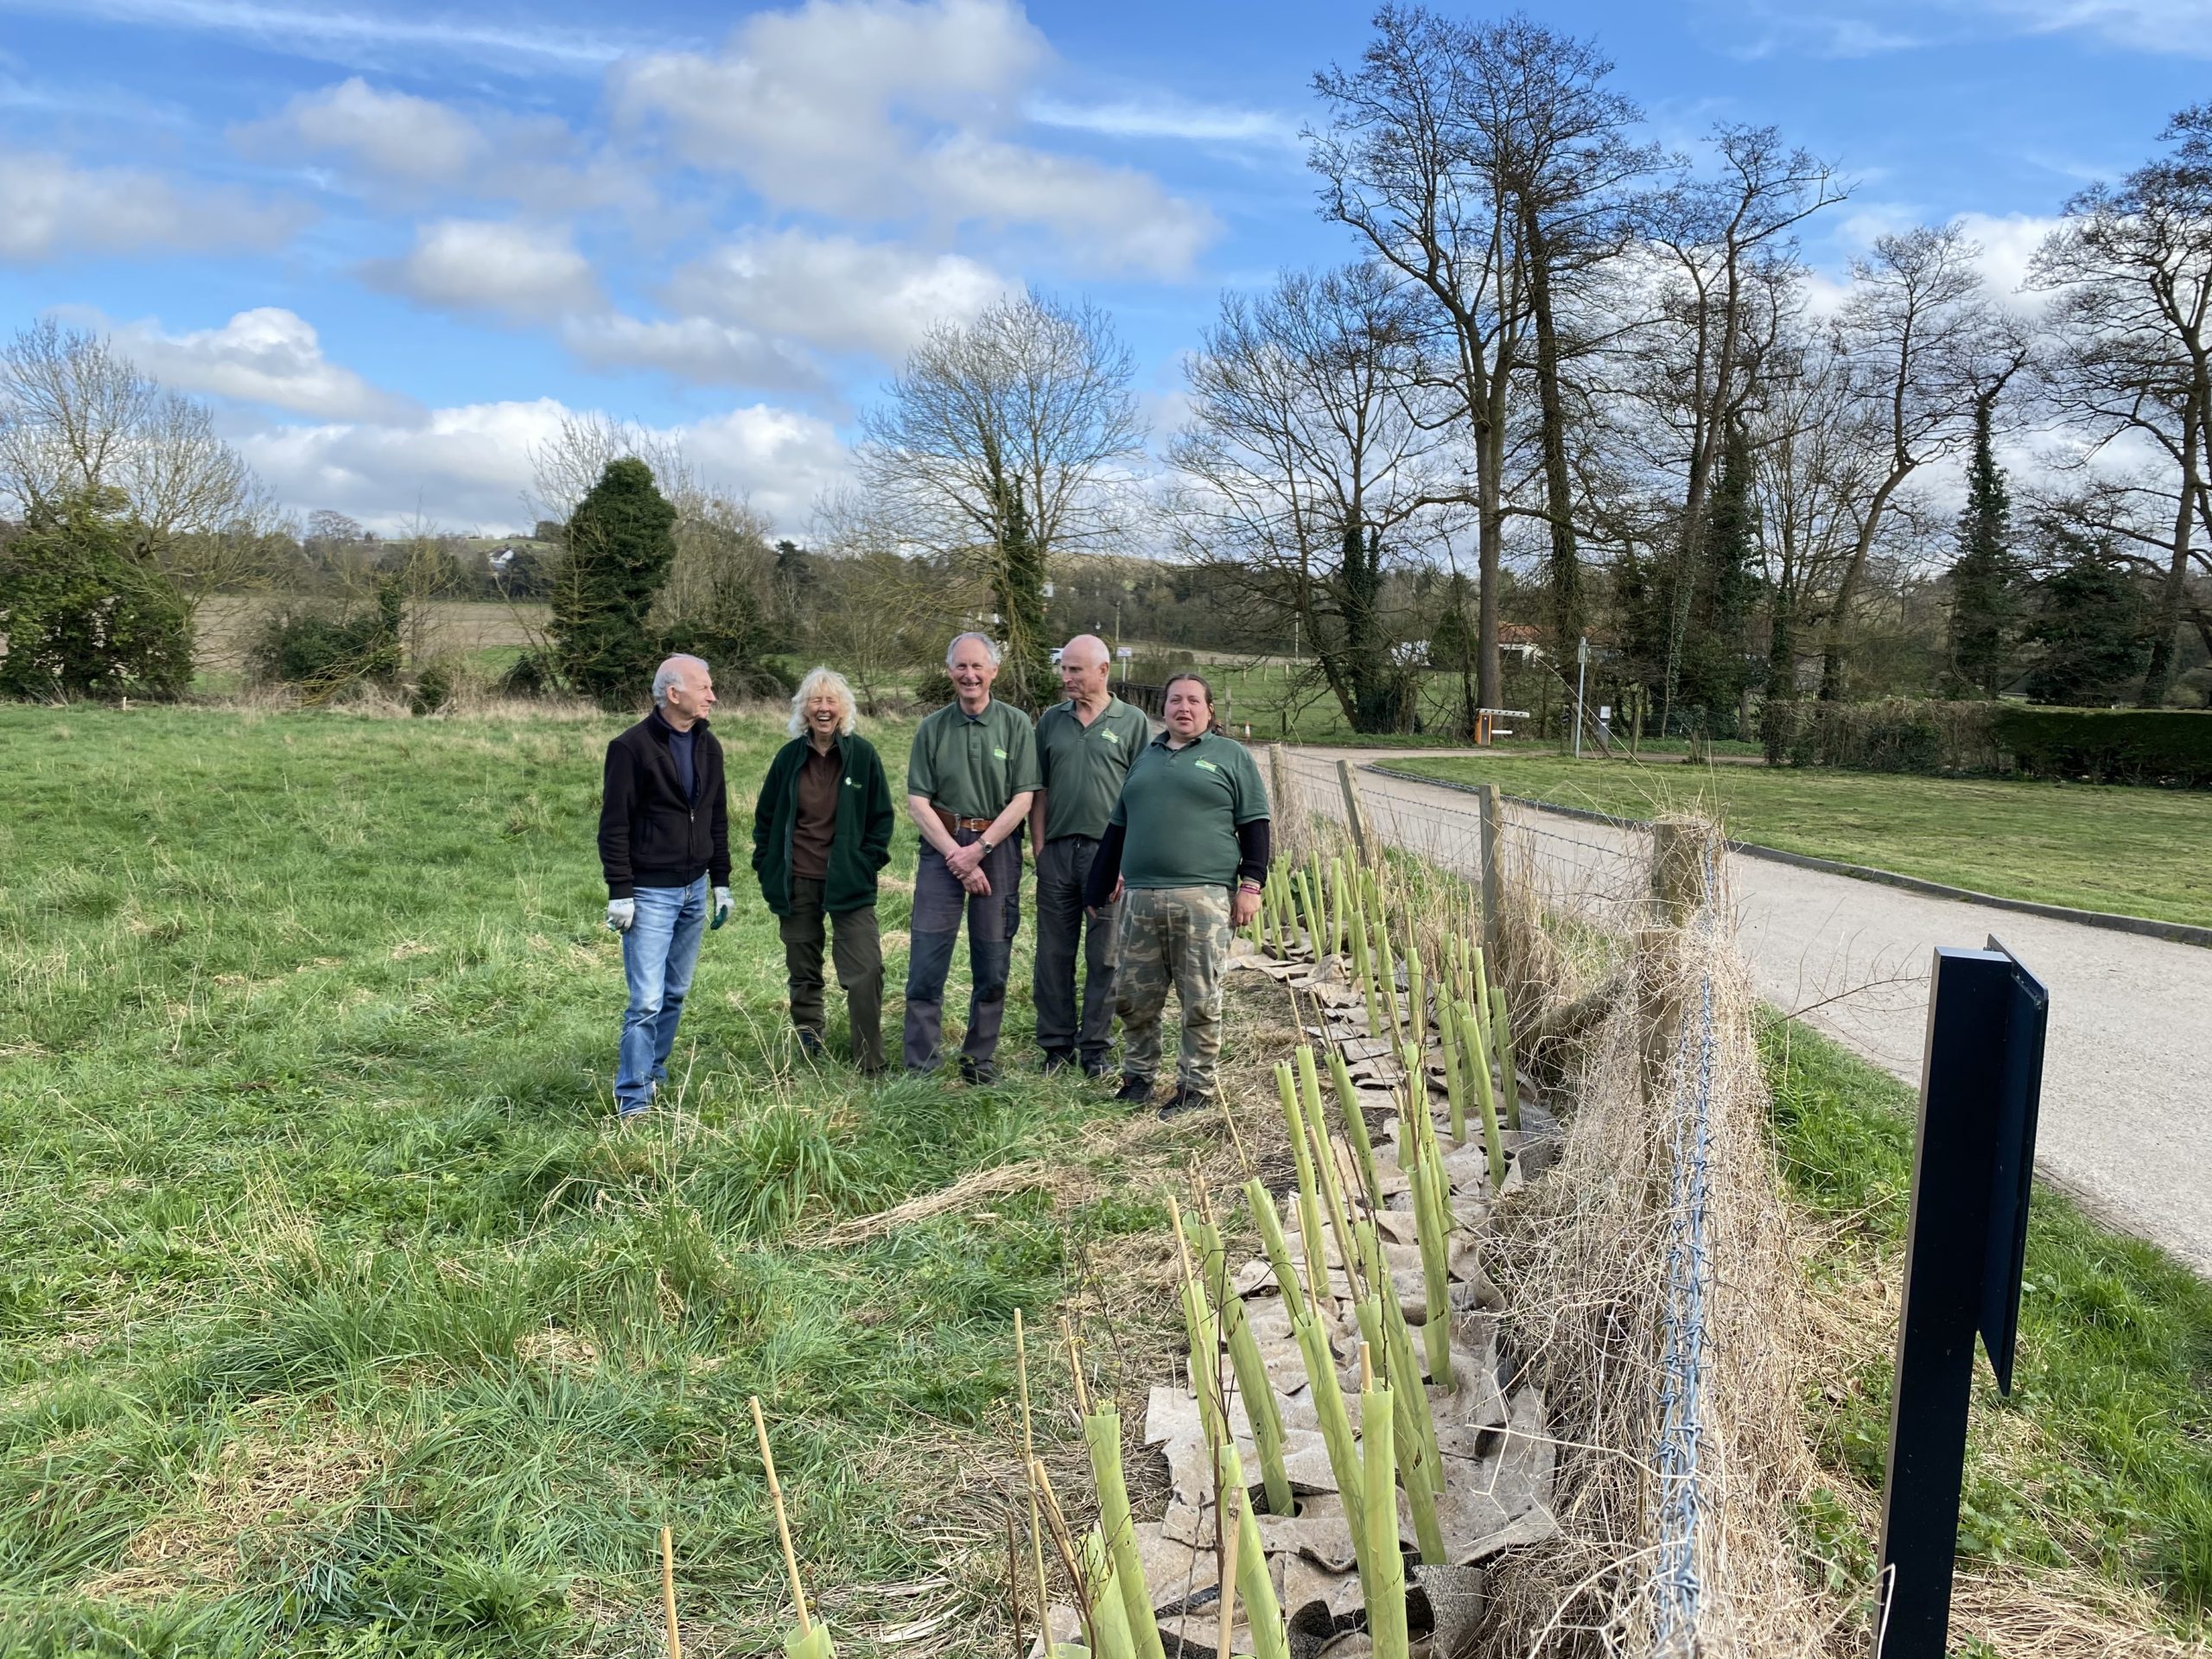 Five people dressed in green and black sanding beside a row of newly planted hedgerow trees in a green field